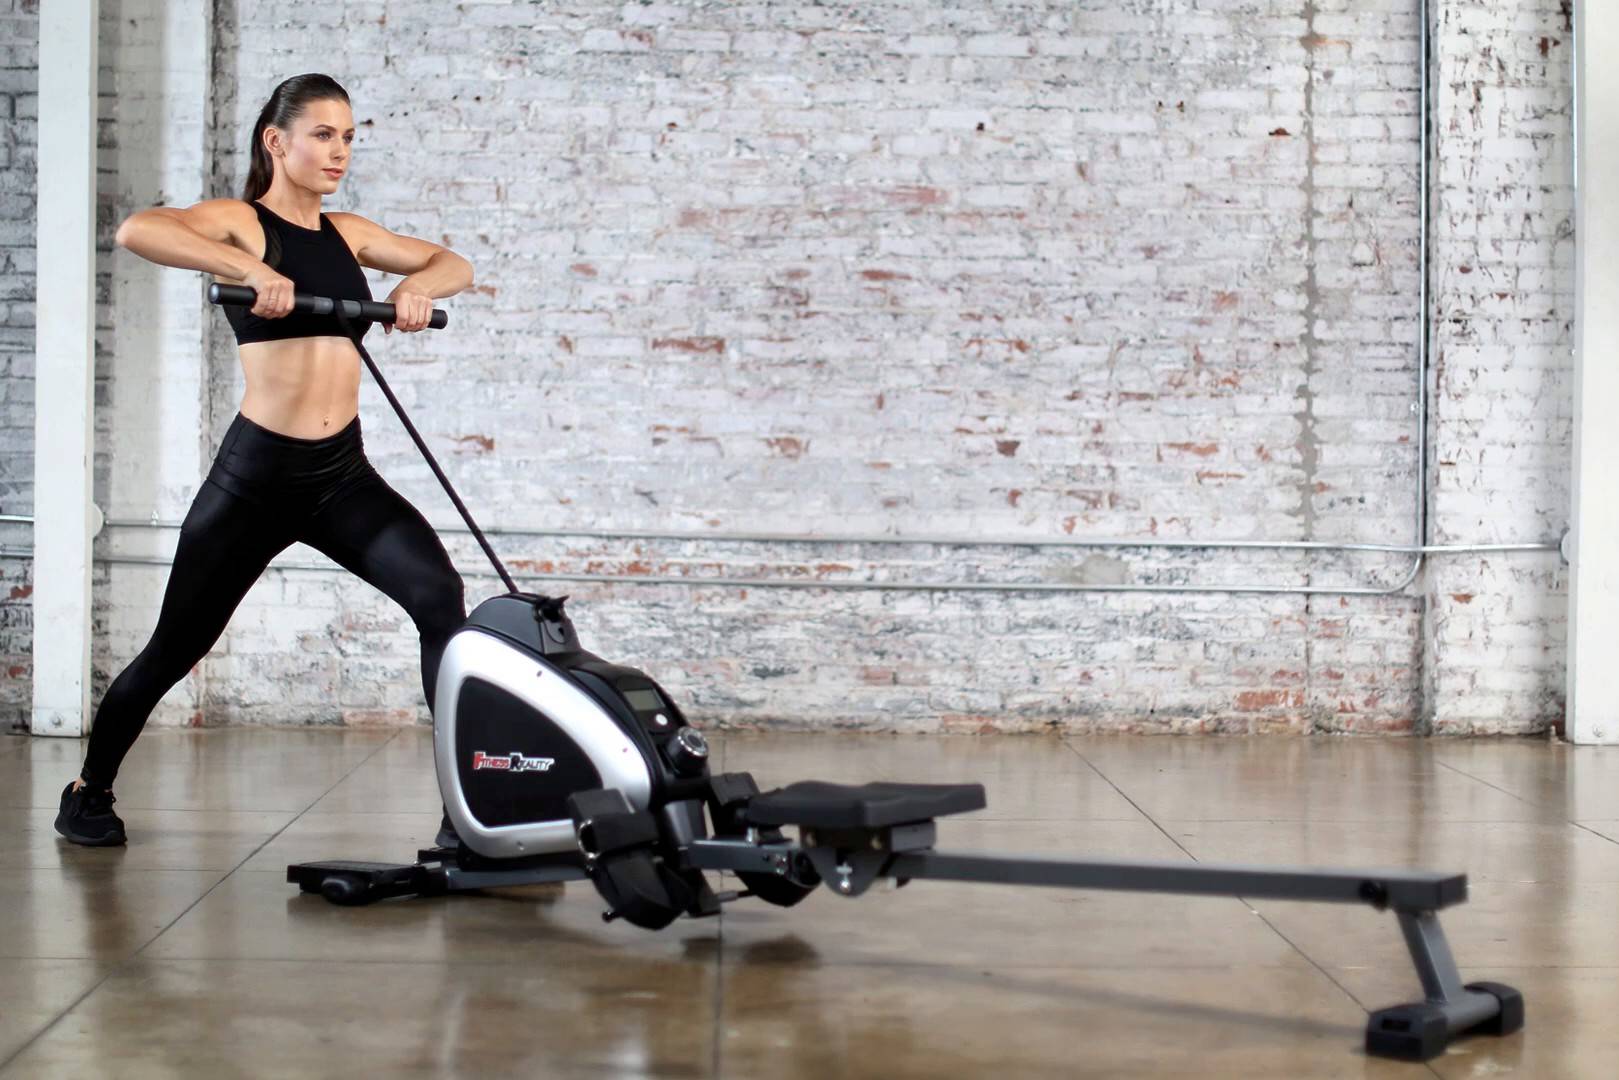 Women Prepearing for Using Rowing Machine